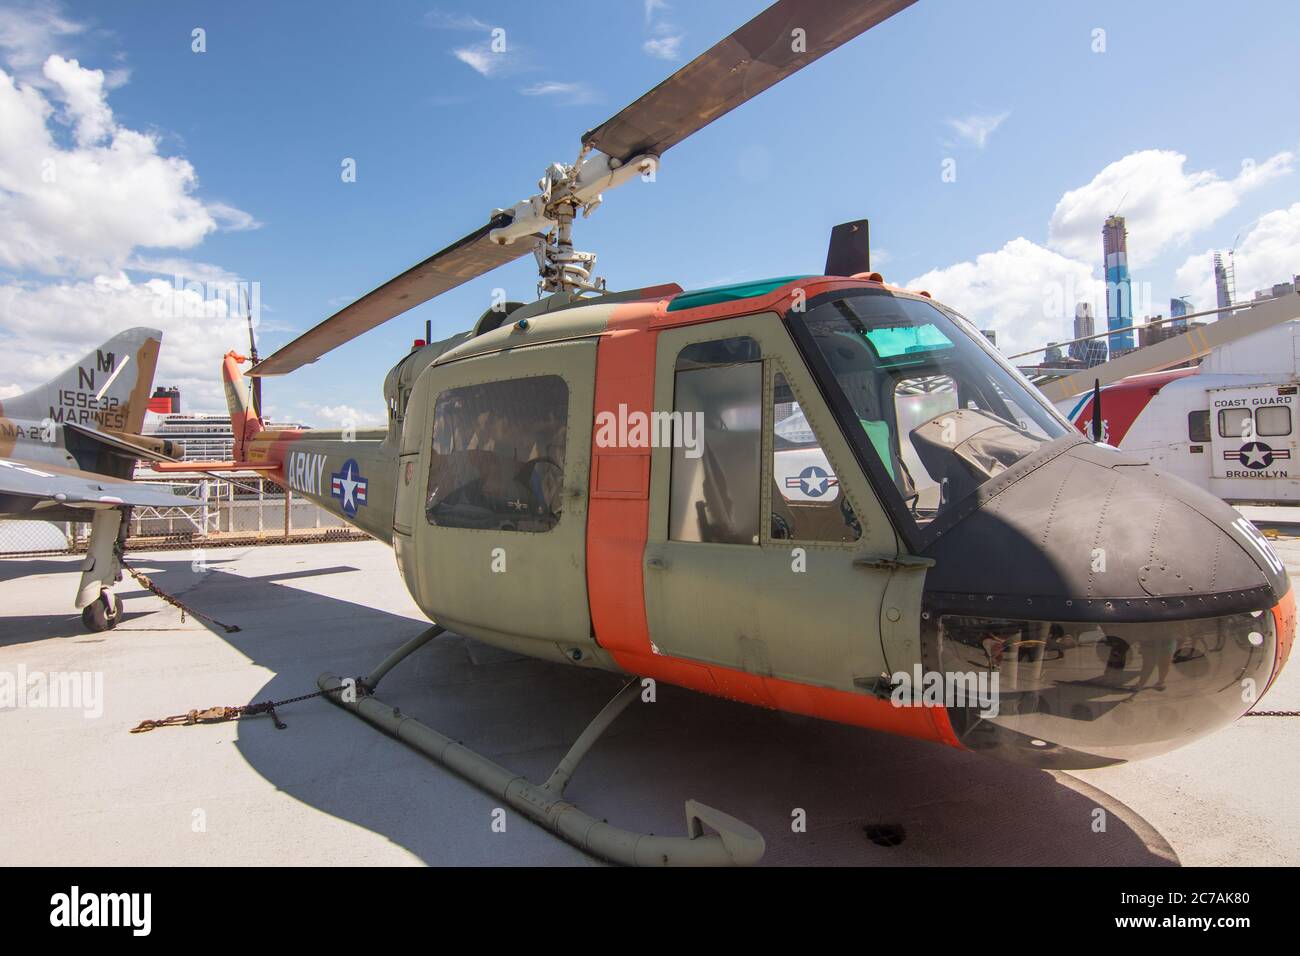 New York, NY / USA - 24 luglio 2019: Intrepid Sea, Air and Space Museum Foto Stock